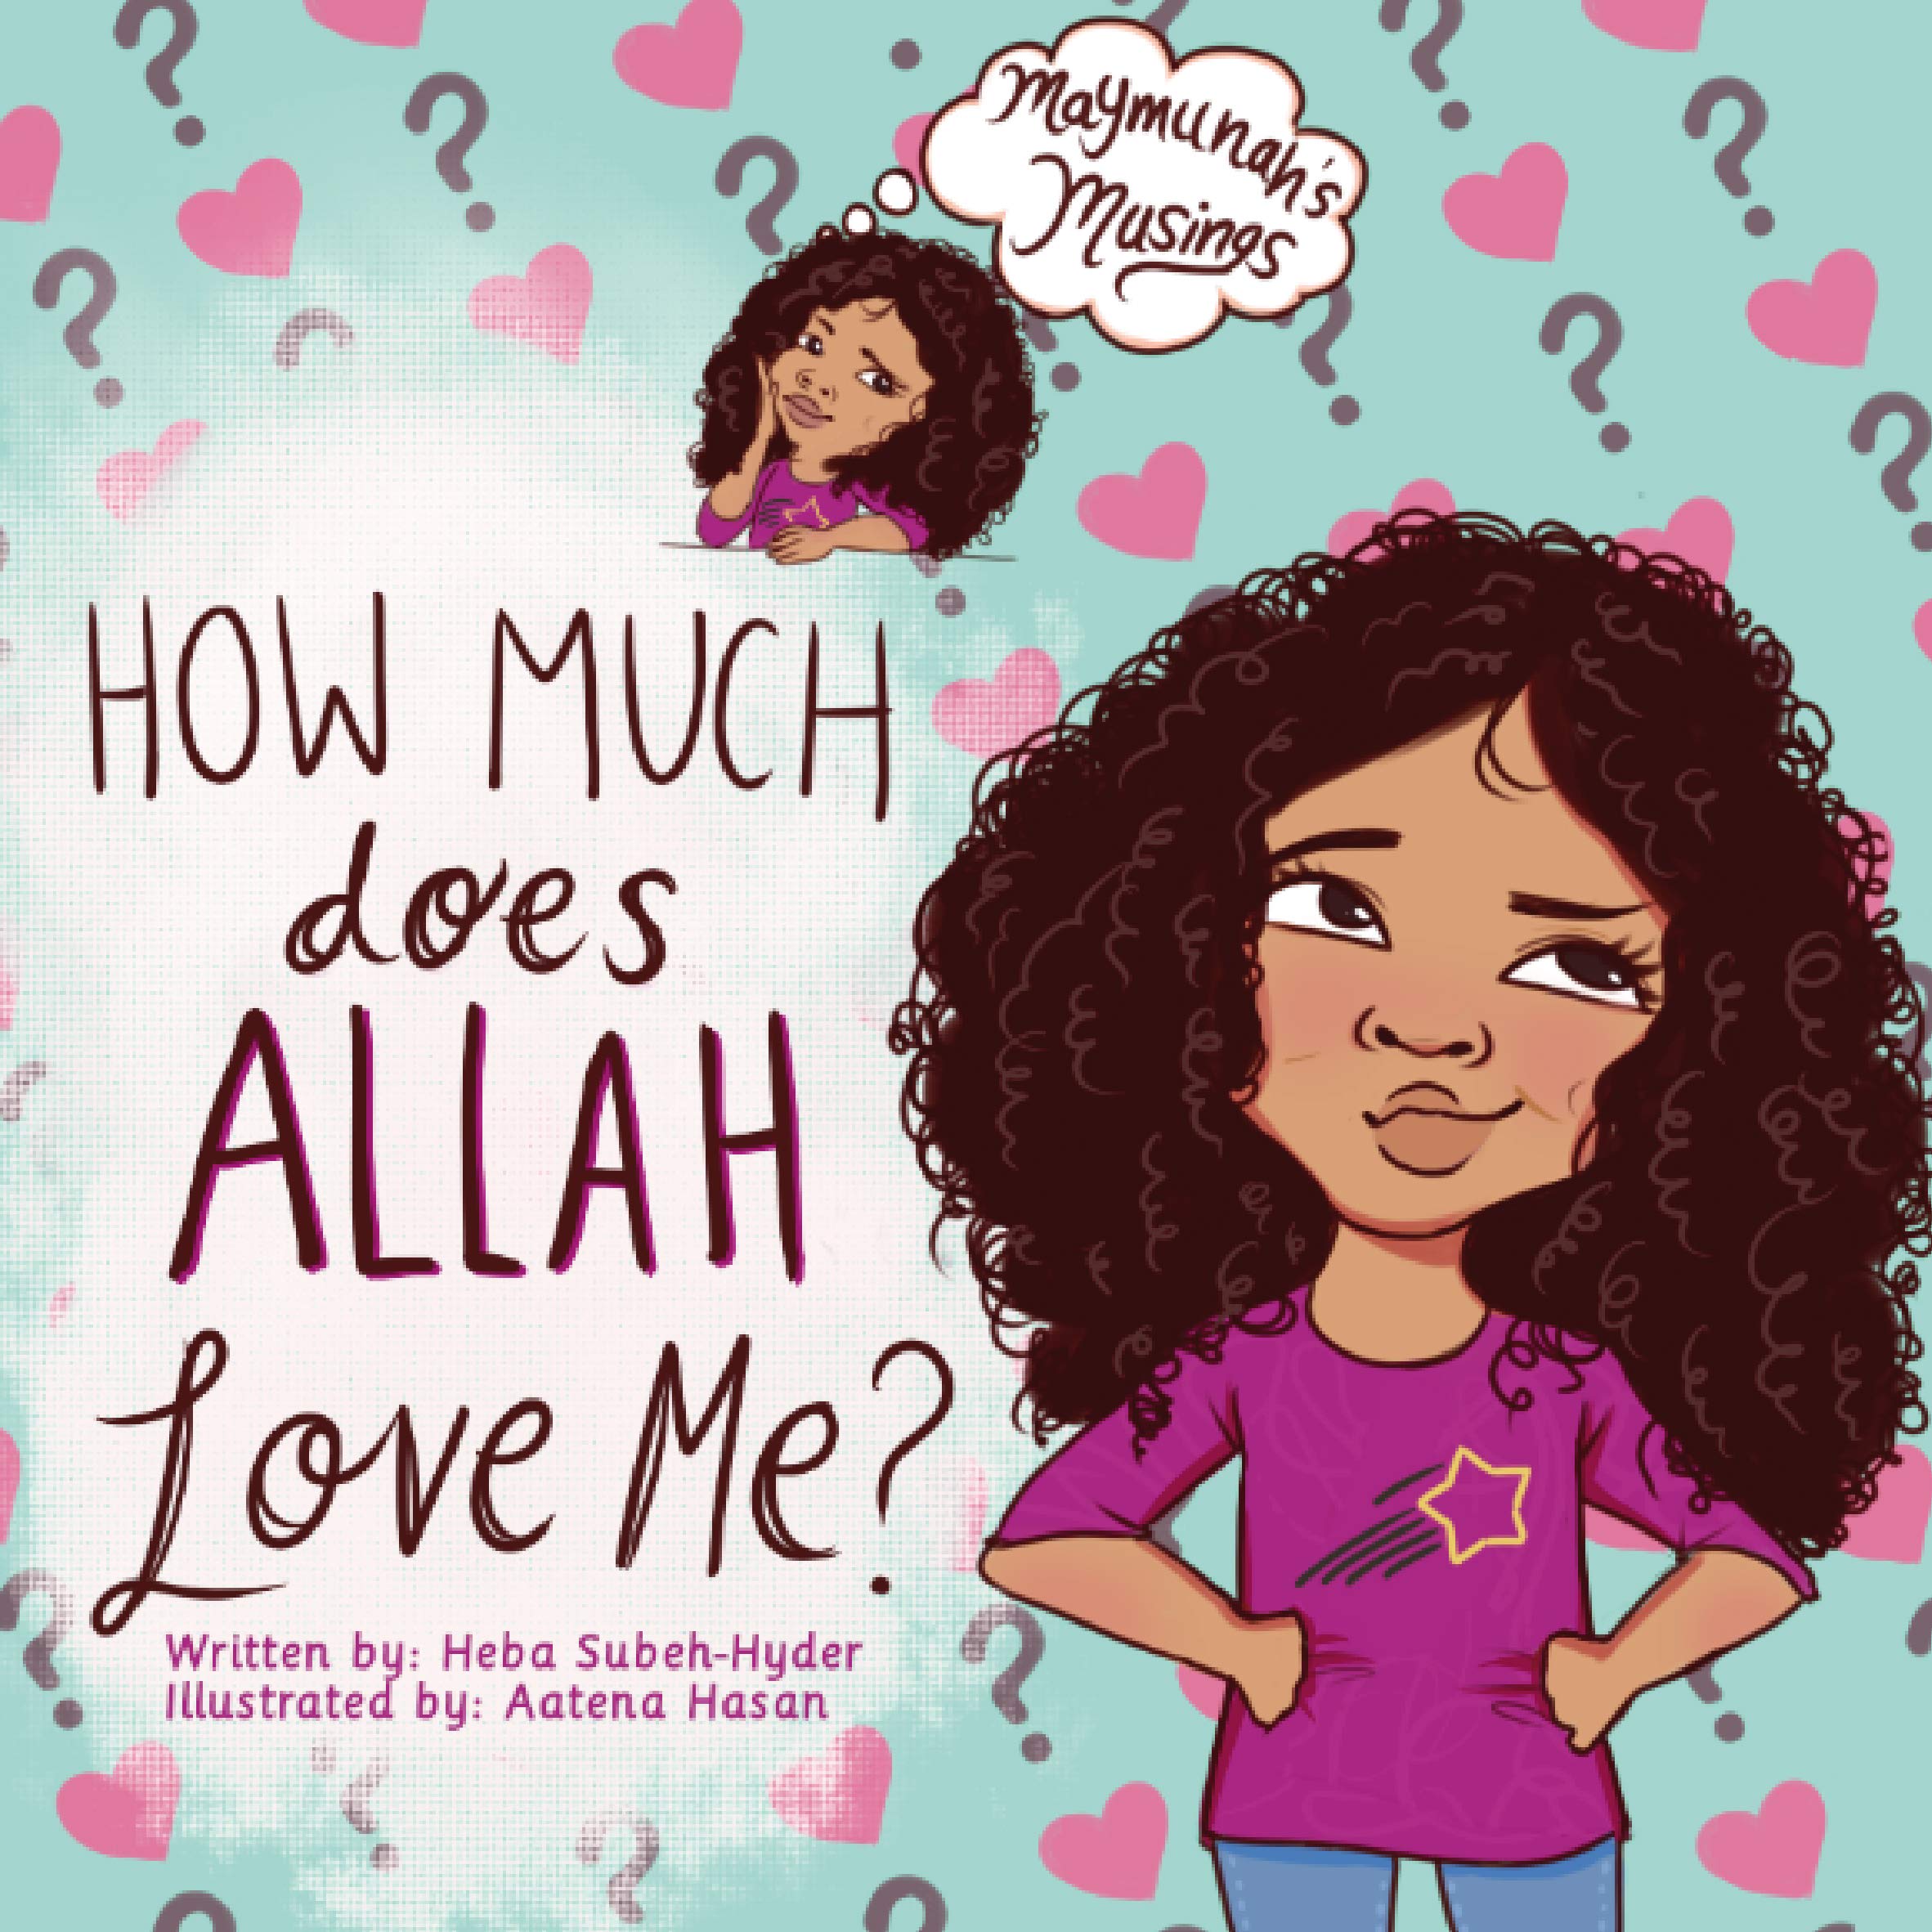 How Much Does Allah Love Me? - Heba Subeh-Hyder